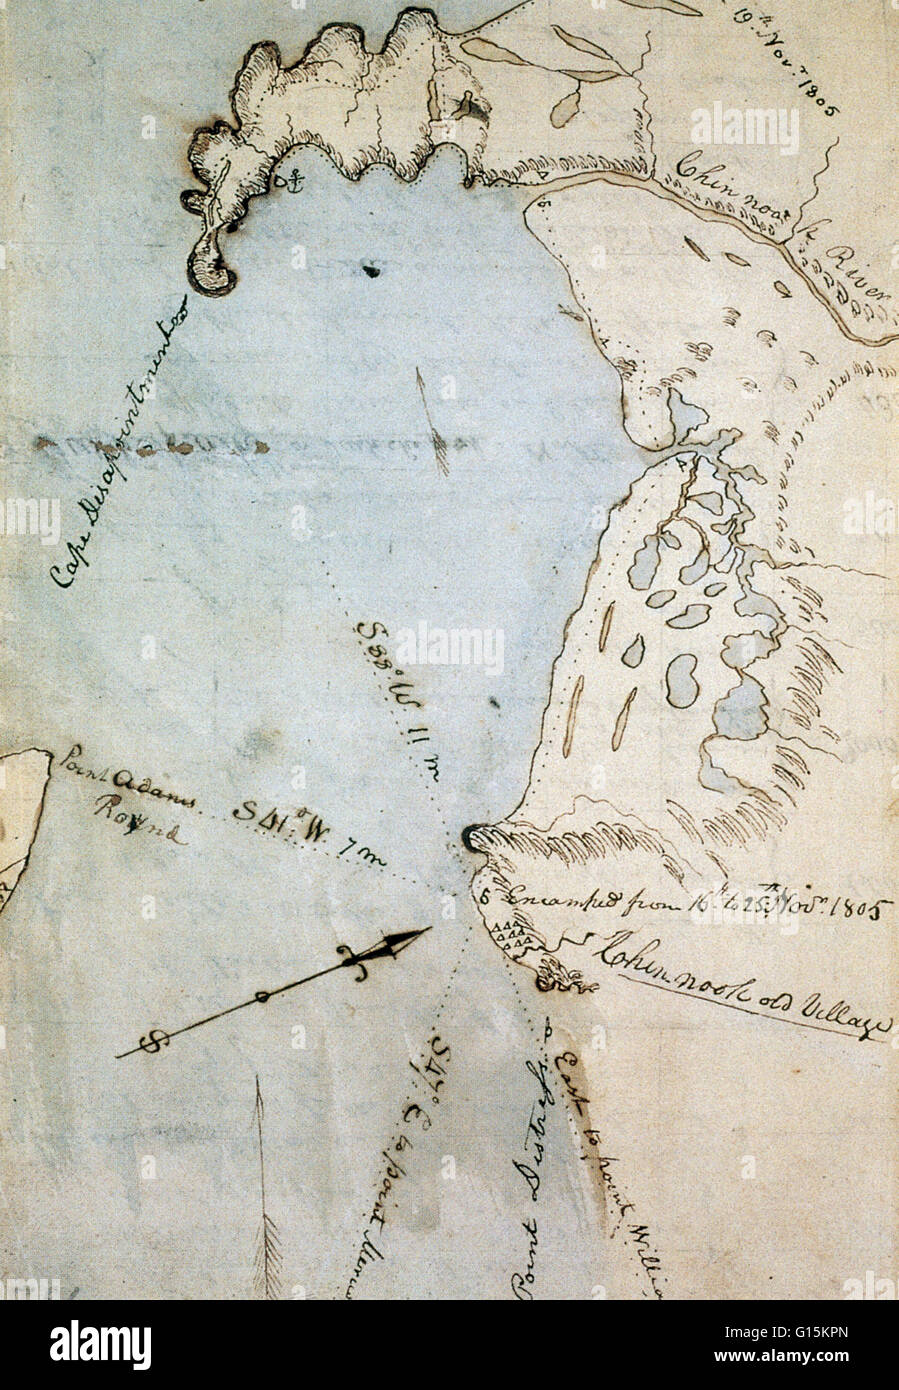 Map of Gray's Bay, in Pacific and Wahkiakum counties, Washington state, made by William Clark (of Lewis & Clark) in November 1805. The bay was originally mistaken for the Pacific ocean, leading to the moniker of 'Cape Disappointment' visible on the upper Stock Photo